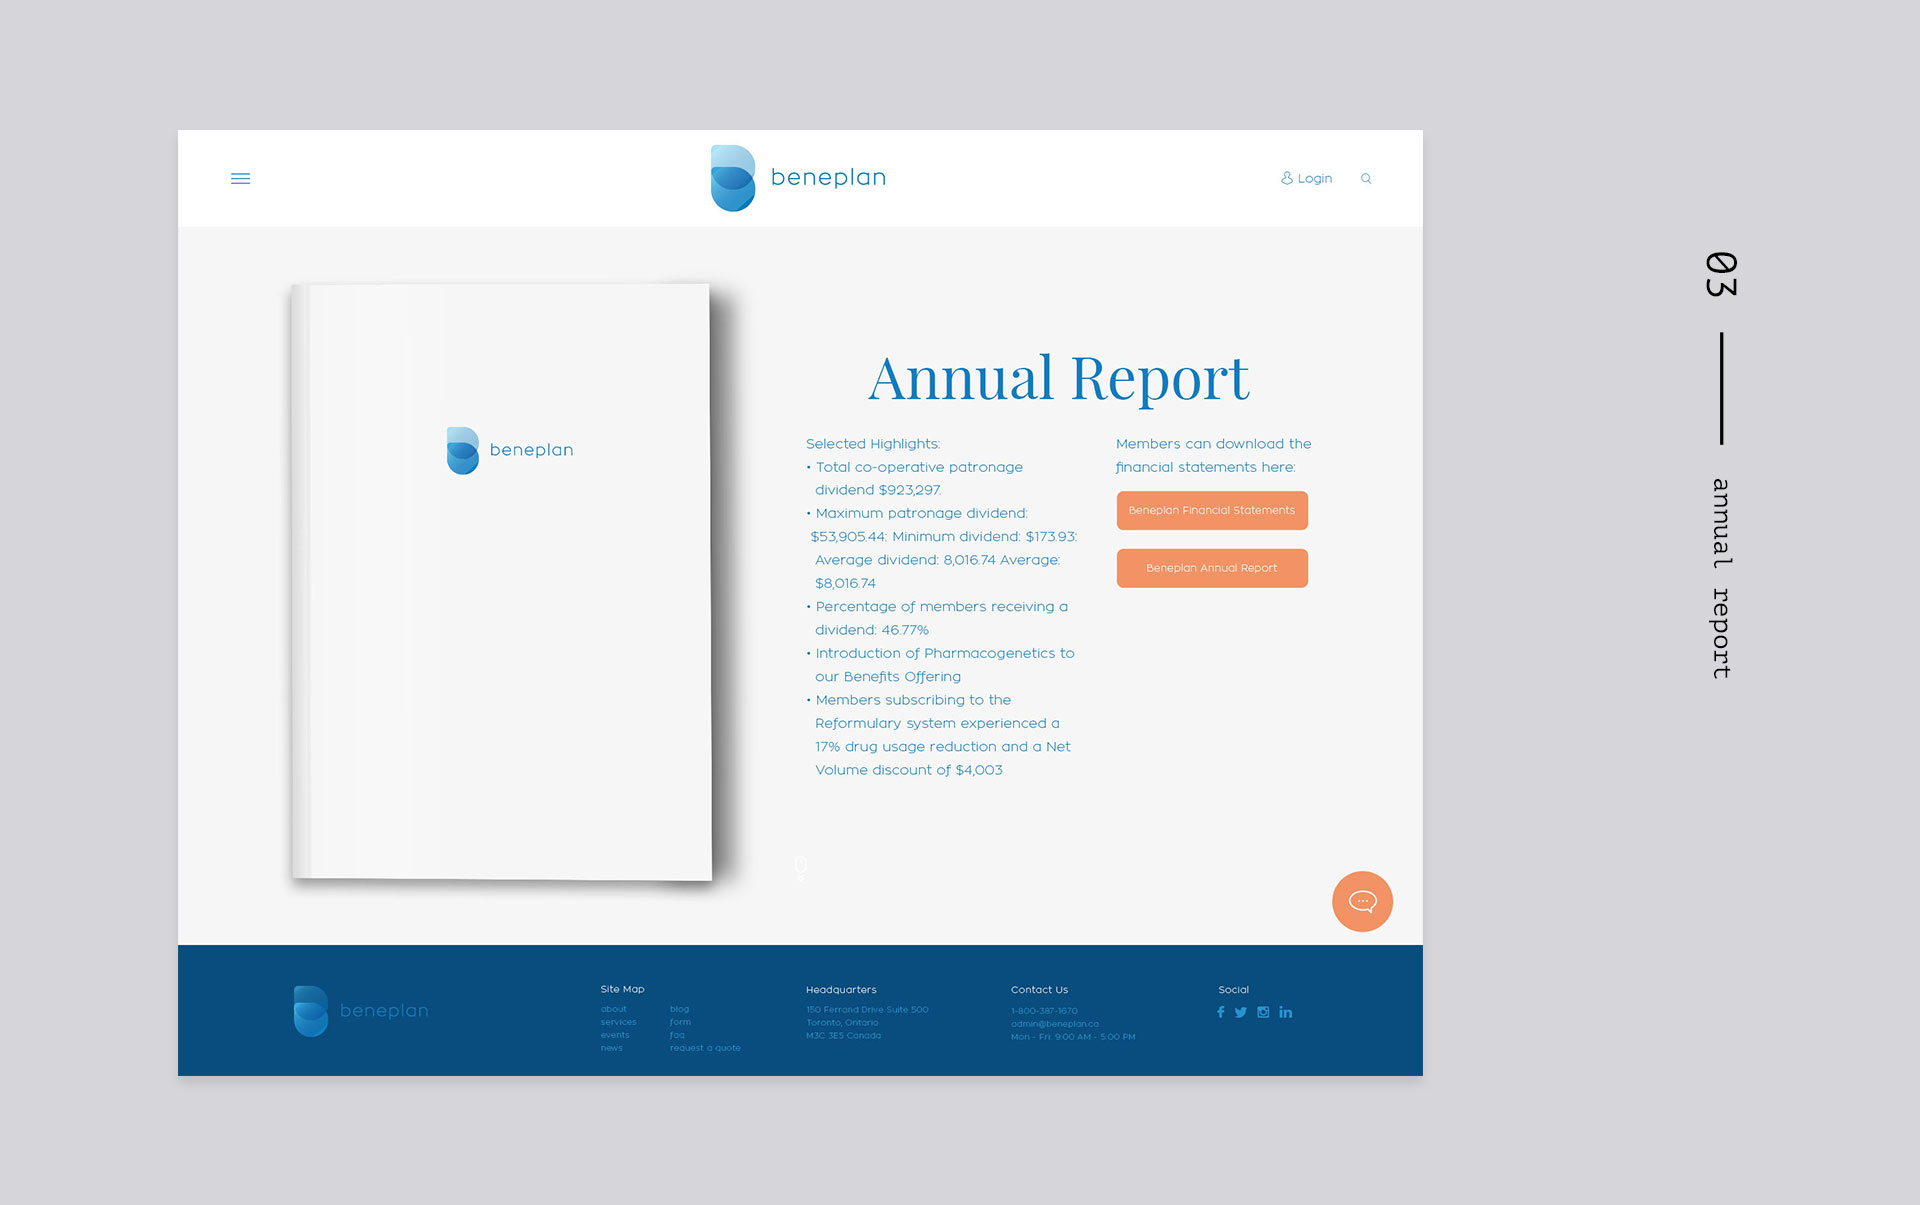 Annual Report Page